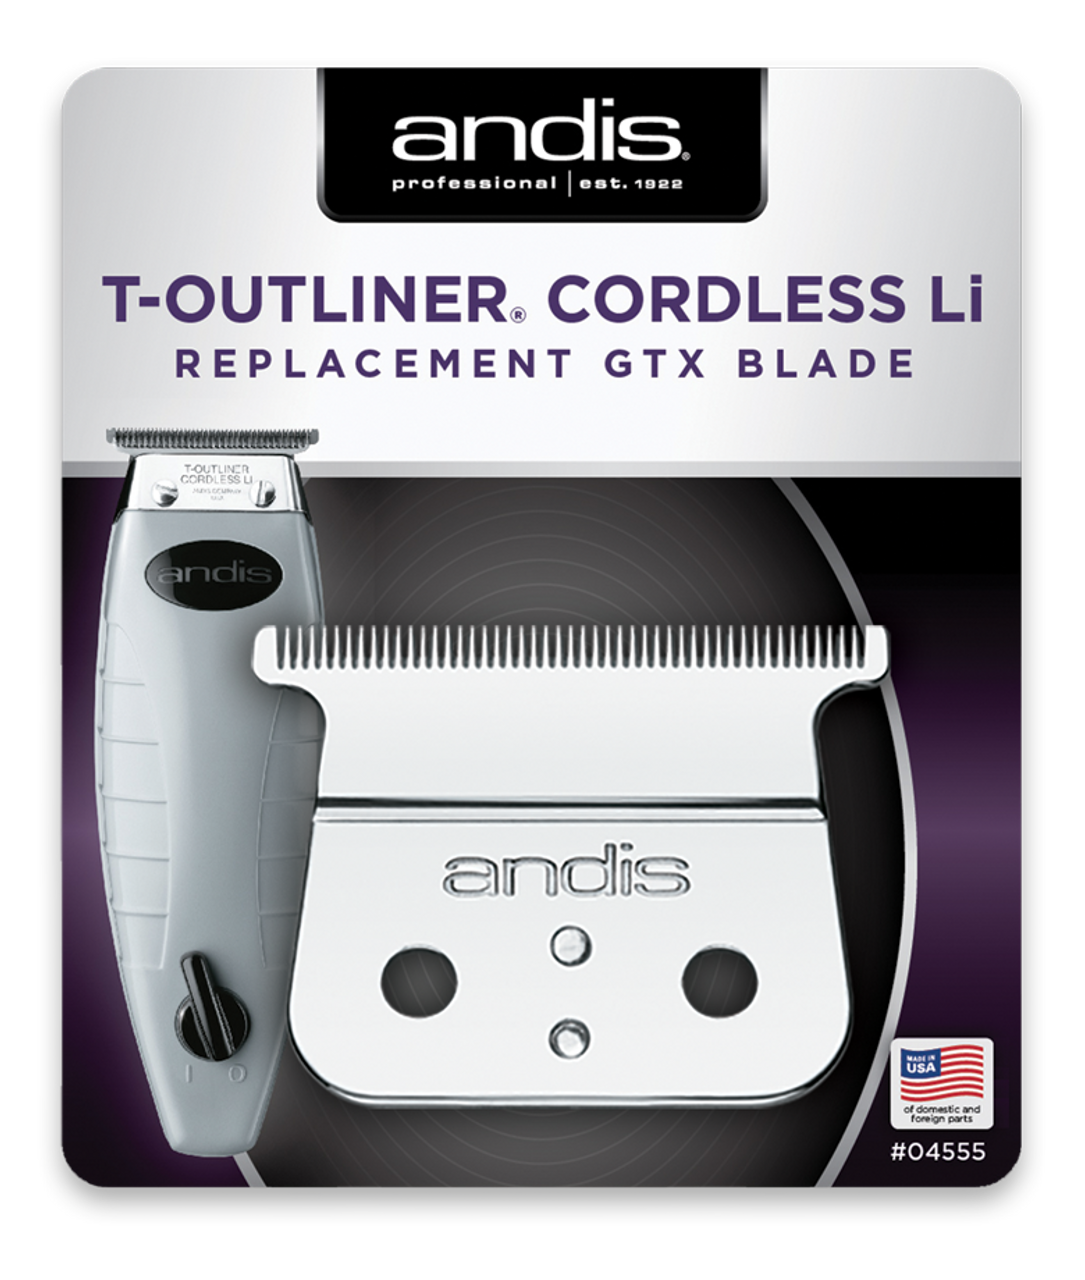 andis t outliner cordless skeleton